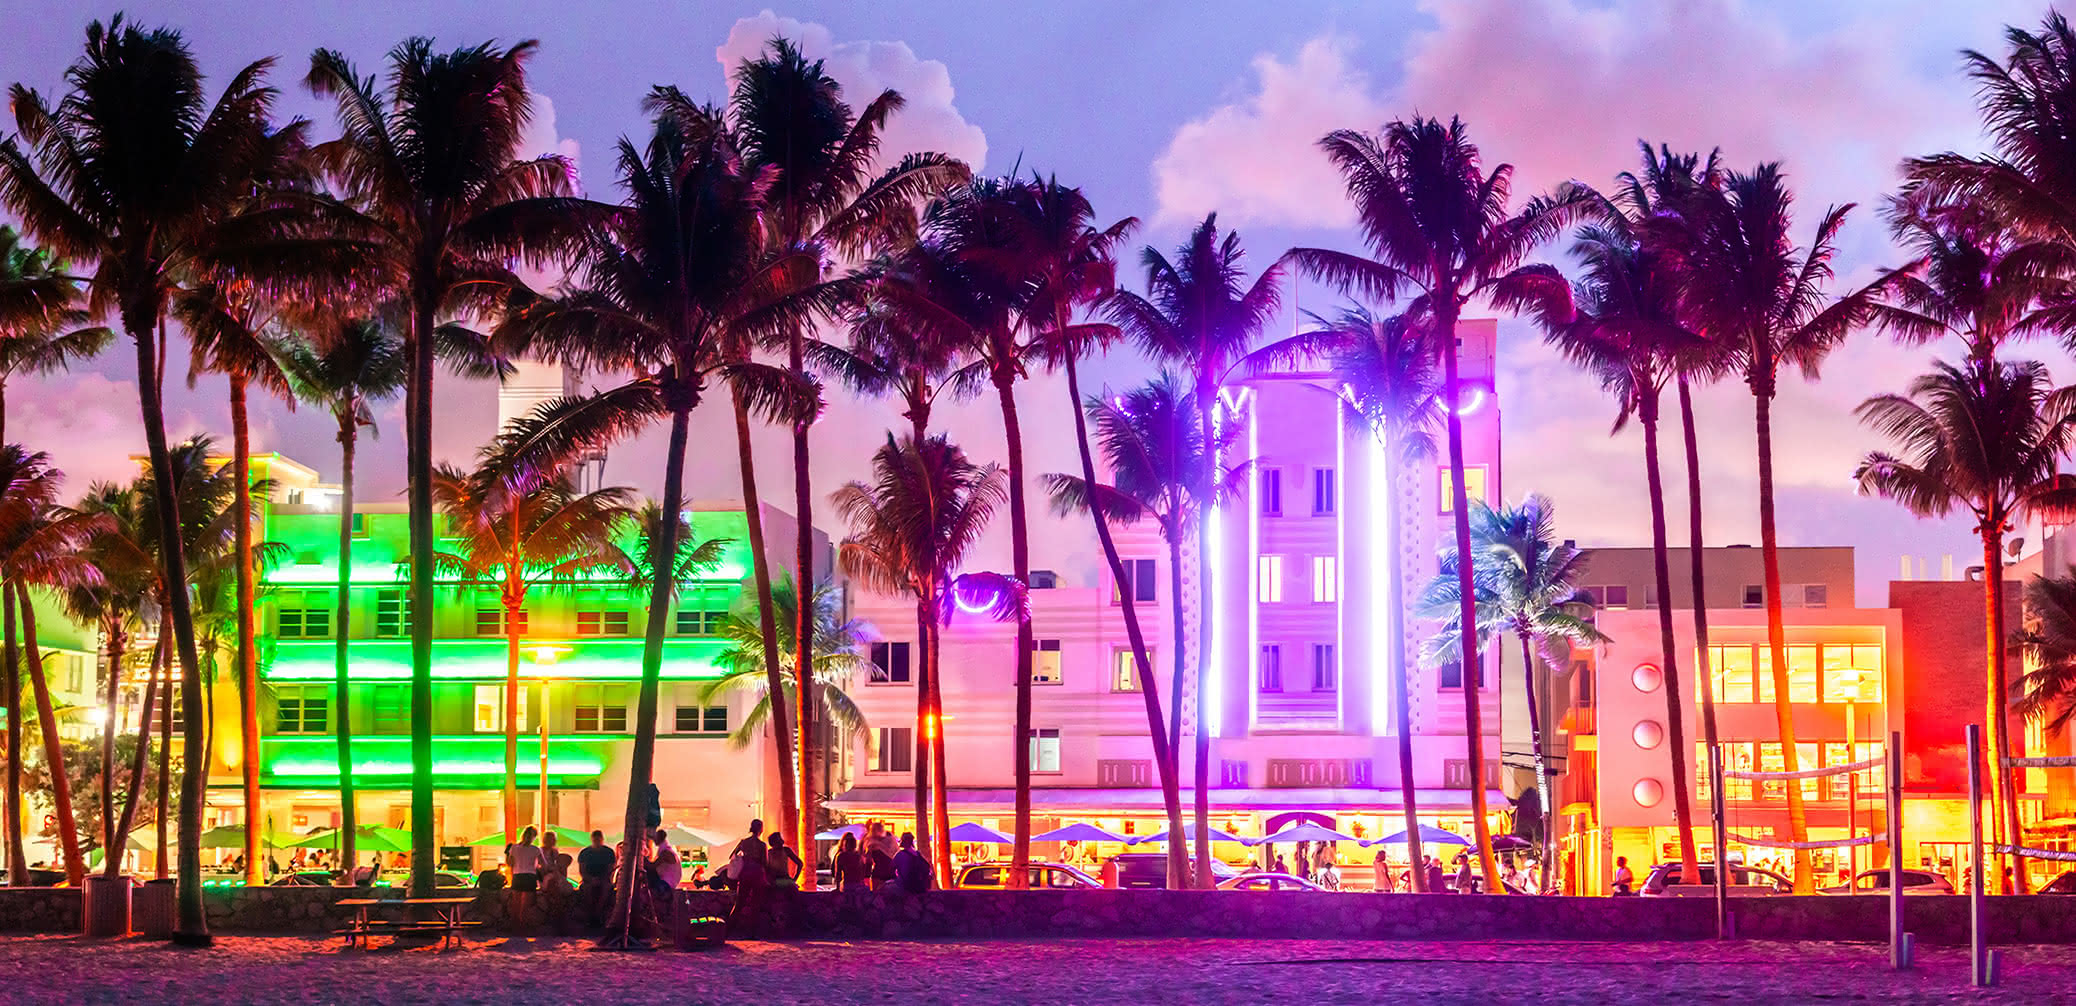 Best Clubs, Lounges And Bars In Miami